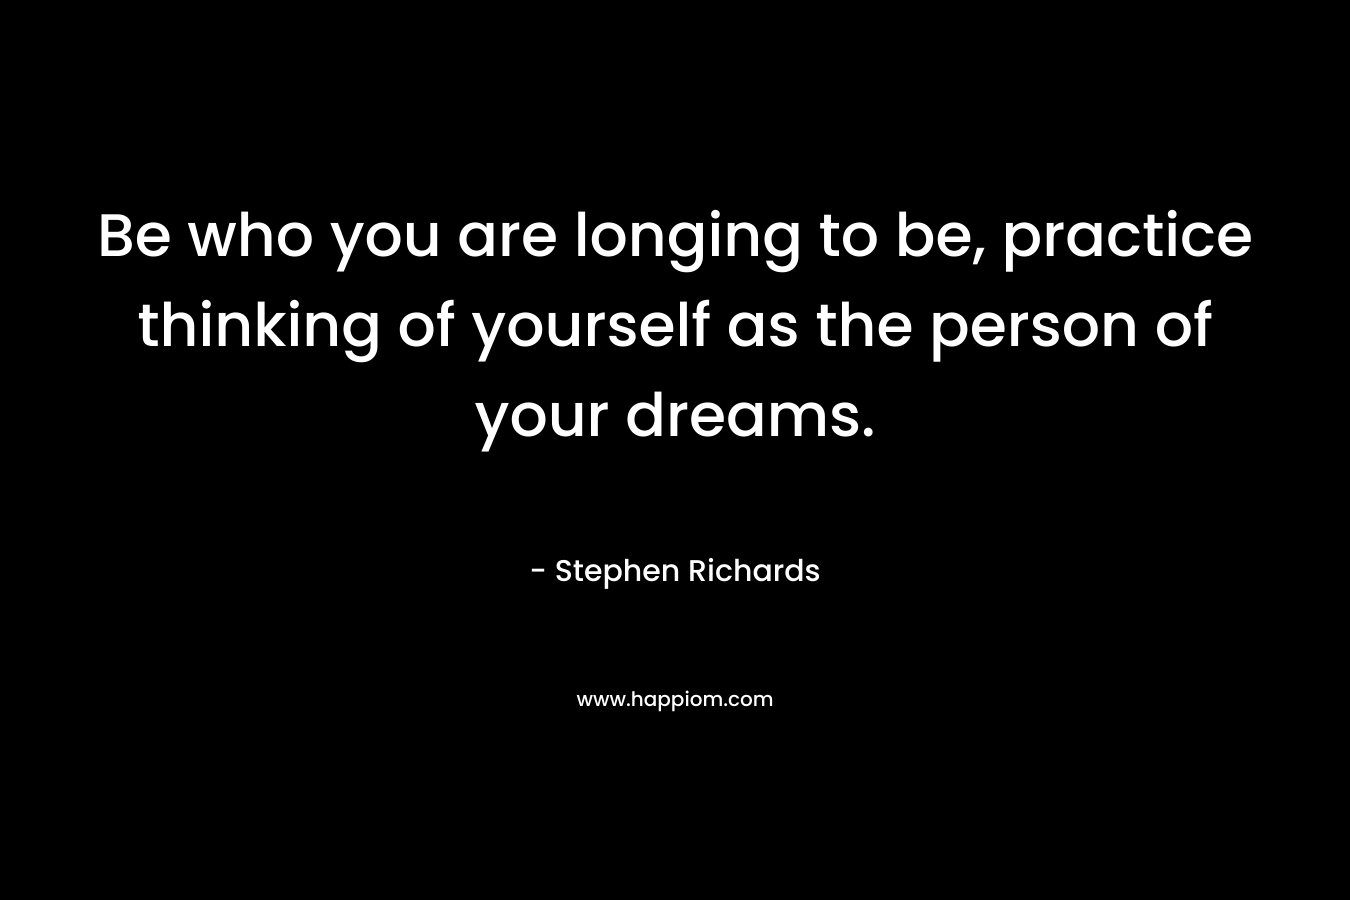 Be who you are longing to be, practice thinking of yourself as the person of your dreams.